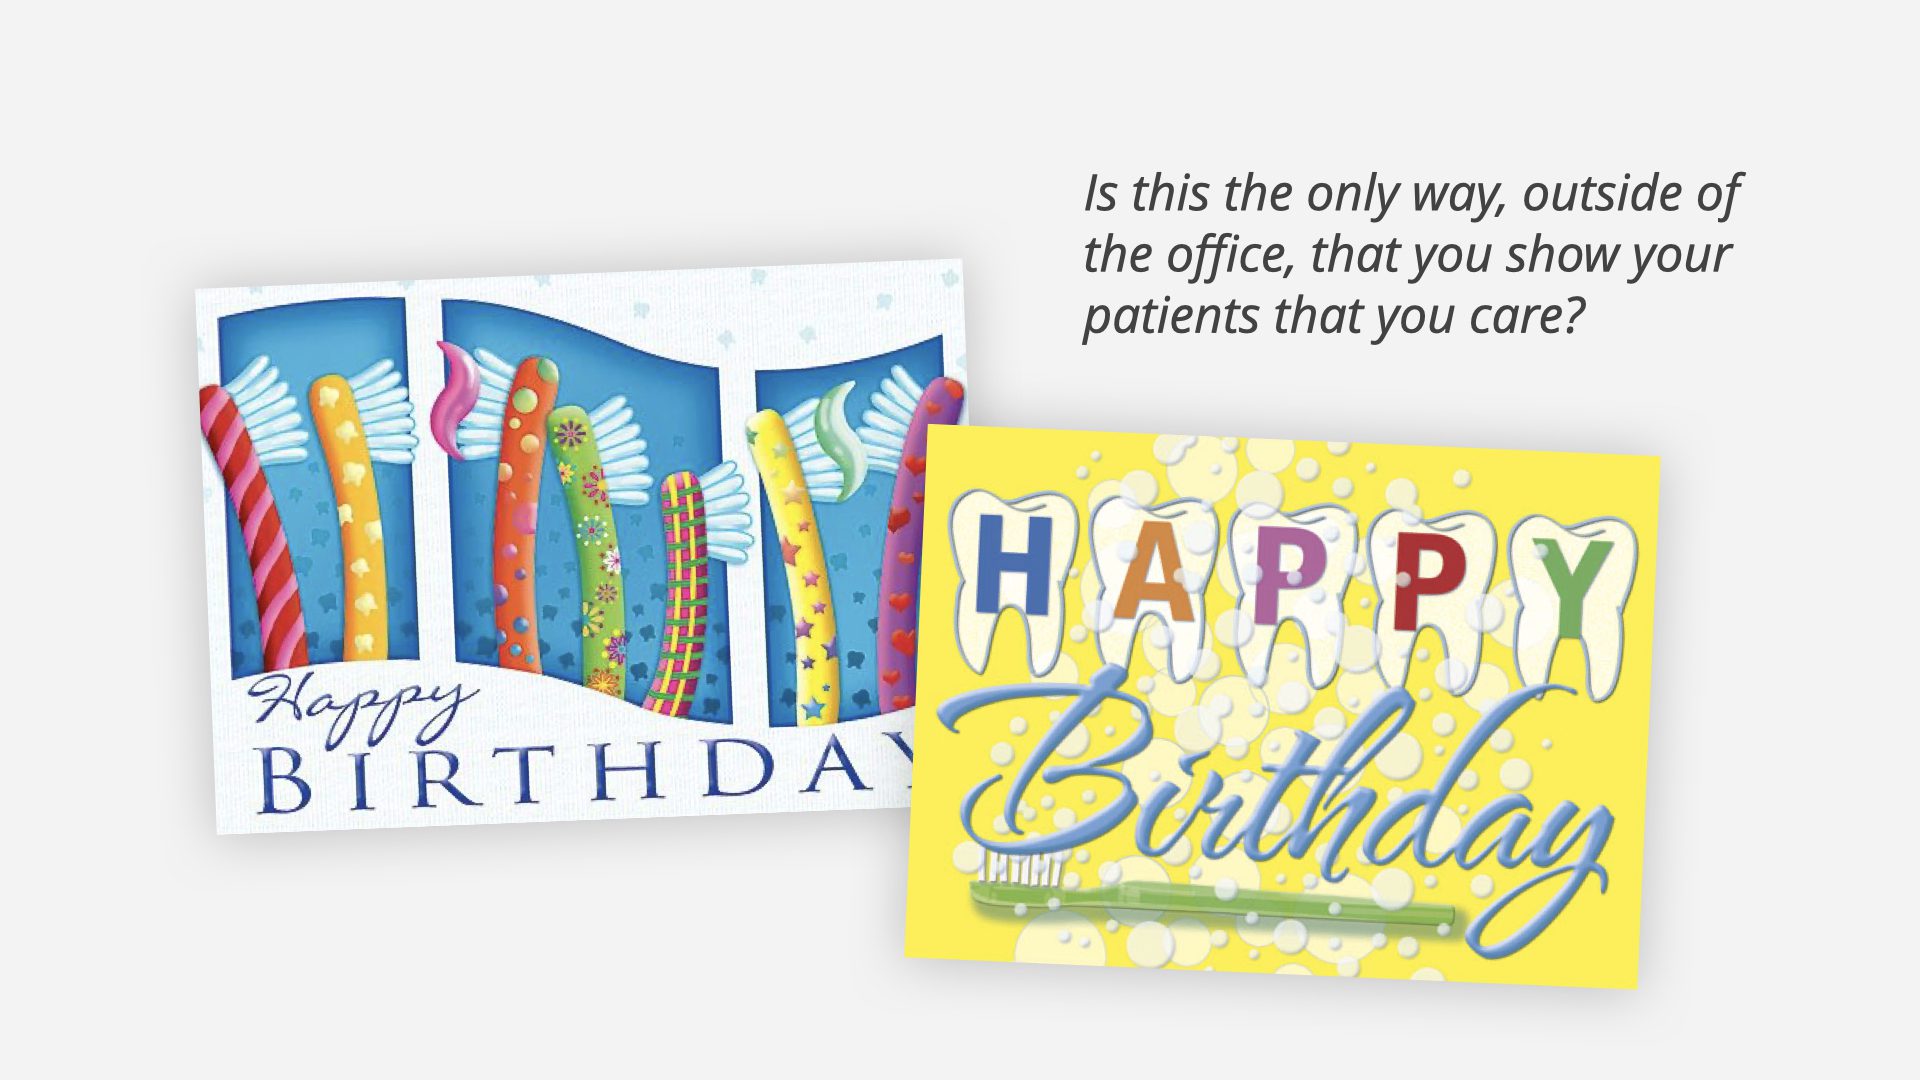 marketing for dental practices - liking happy bday